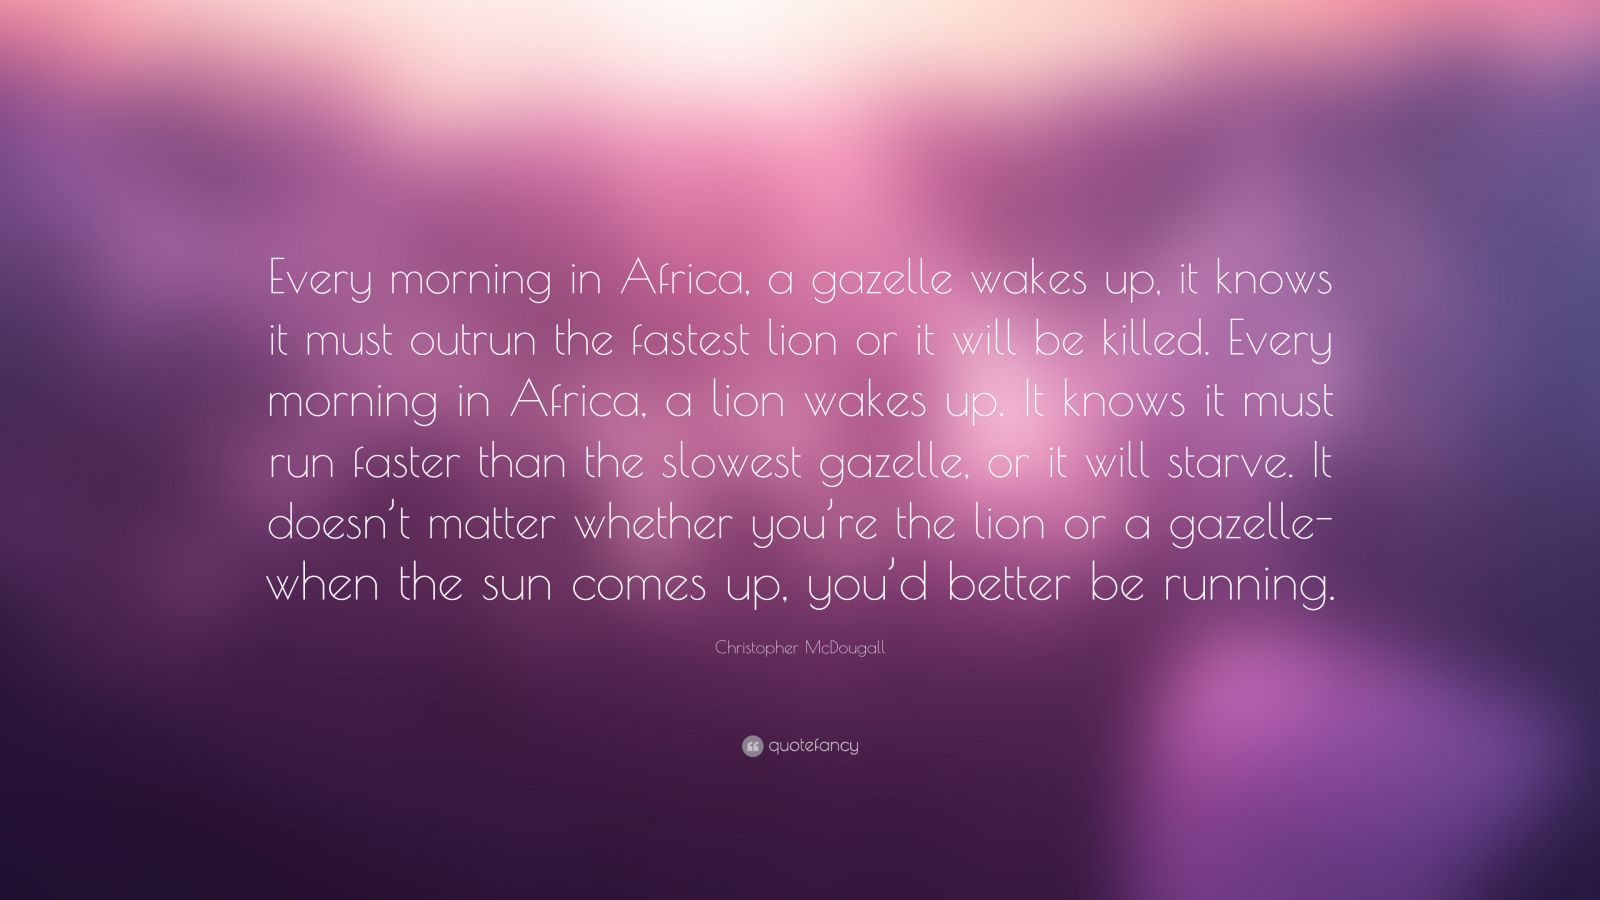 6365318 Christopher McDougall Quote Every morning in Africa a gazelle